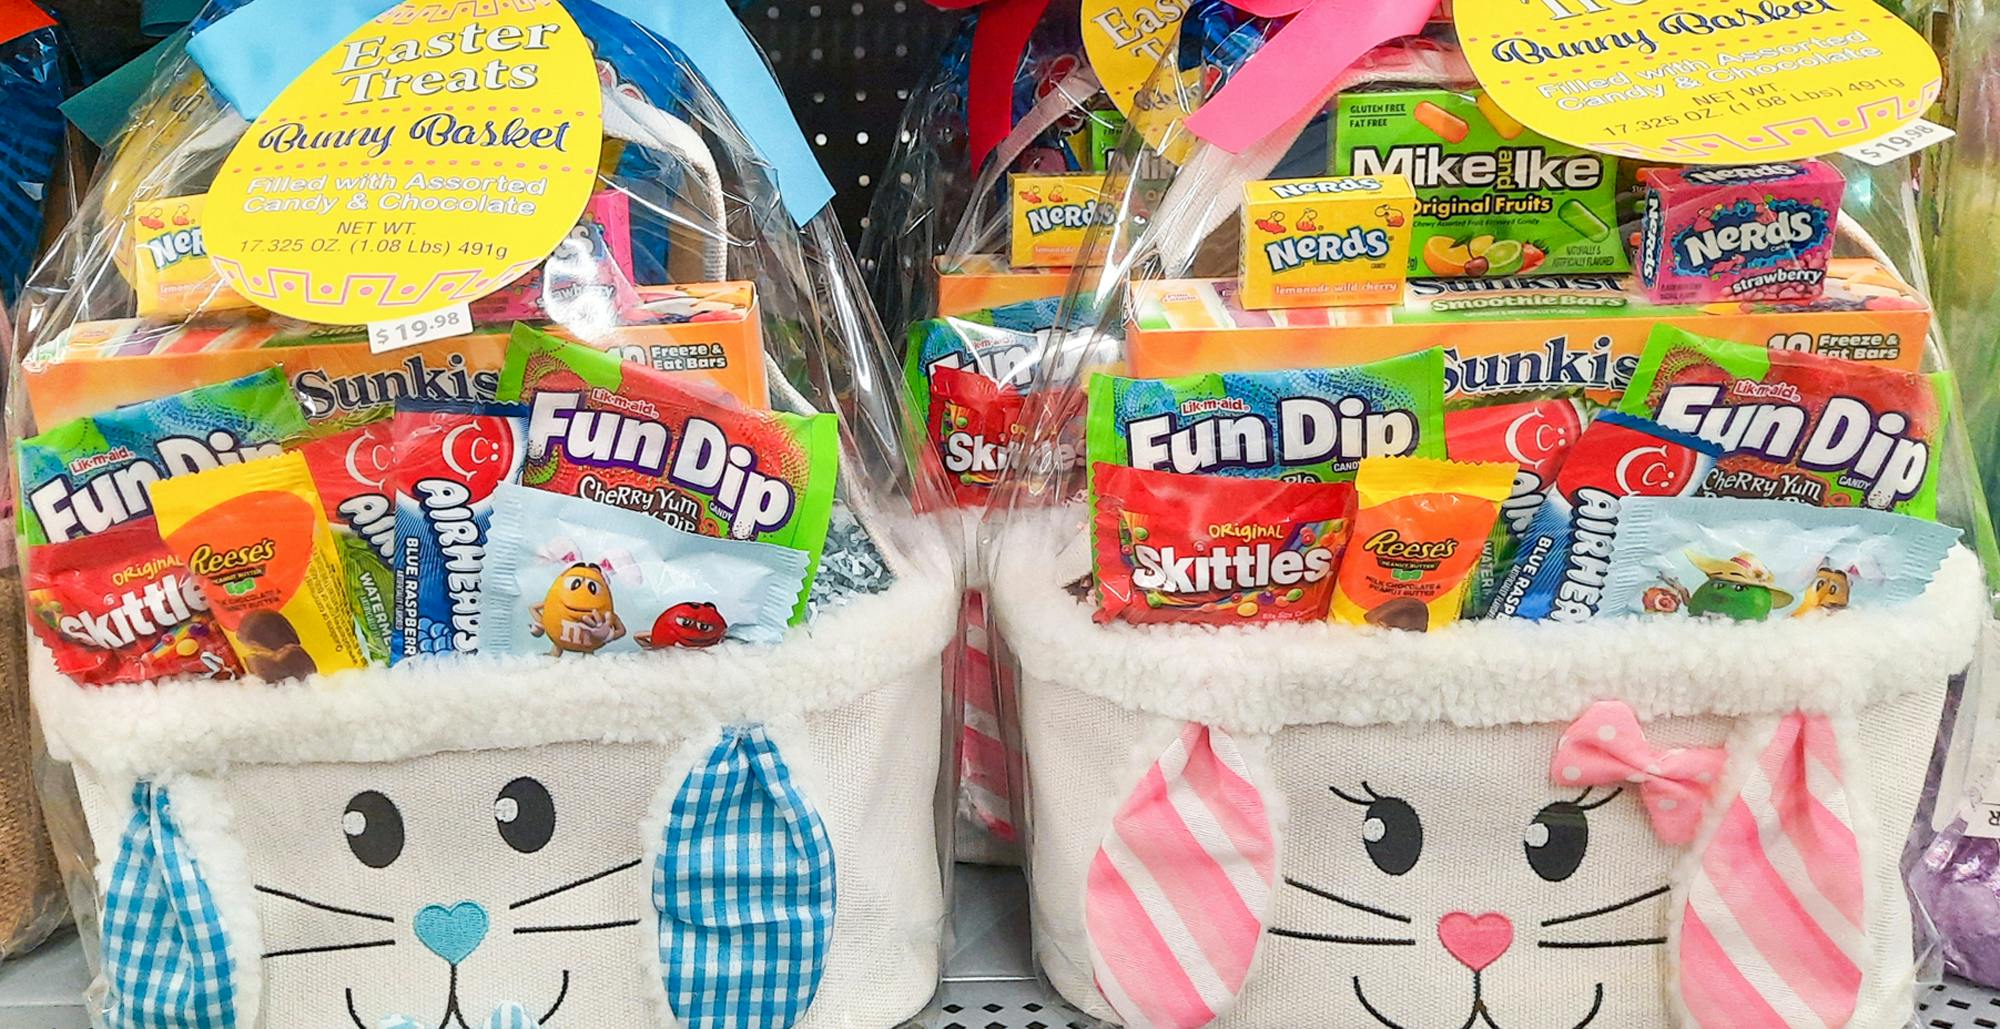 Walmart's Giving You an Easter Meal & Basket Stuffers at Pre-Inflation Prices